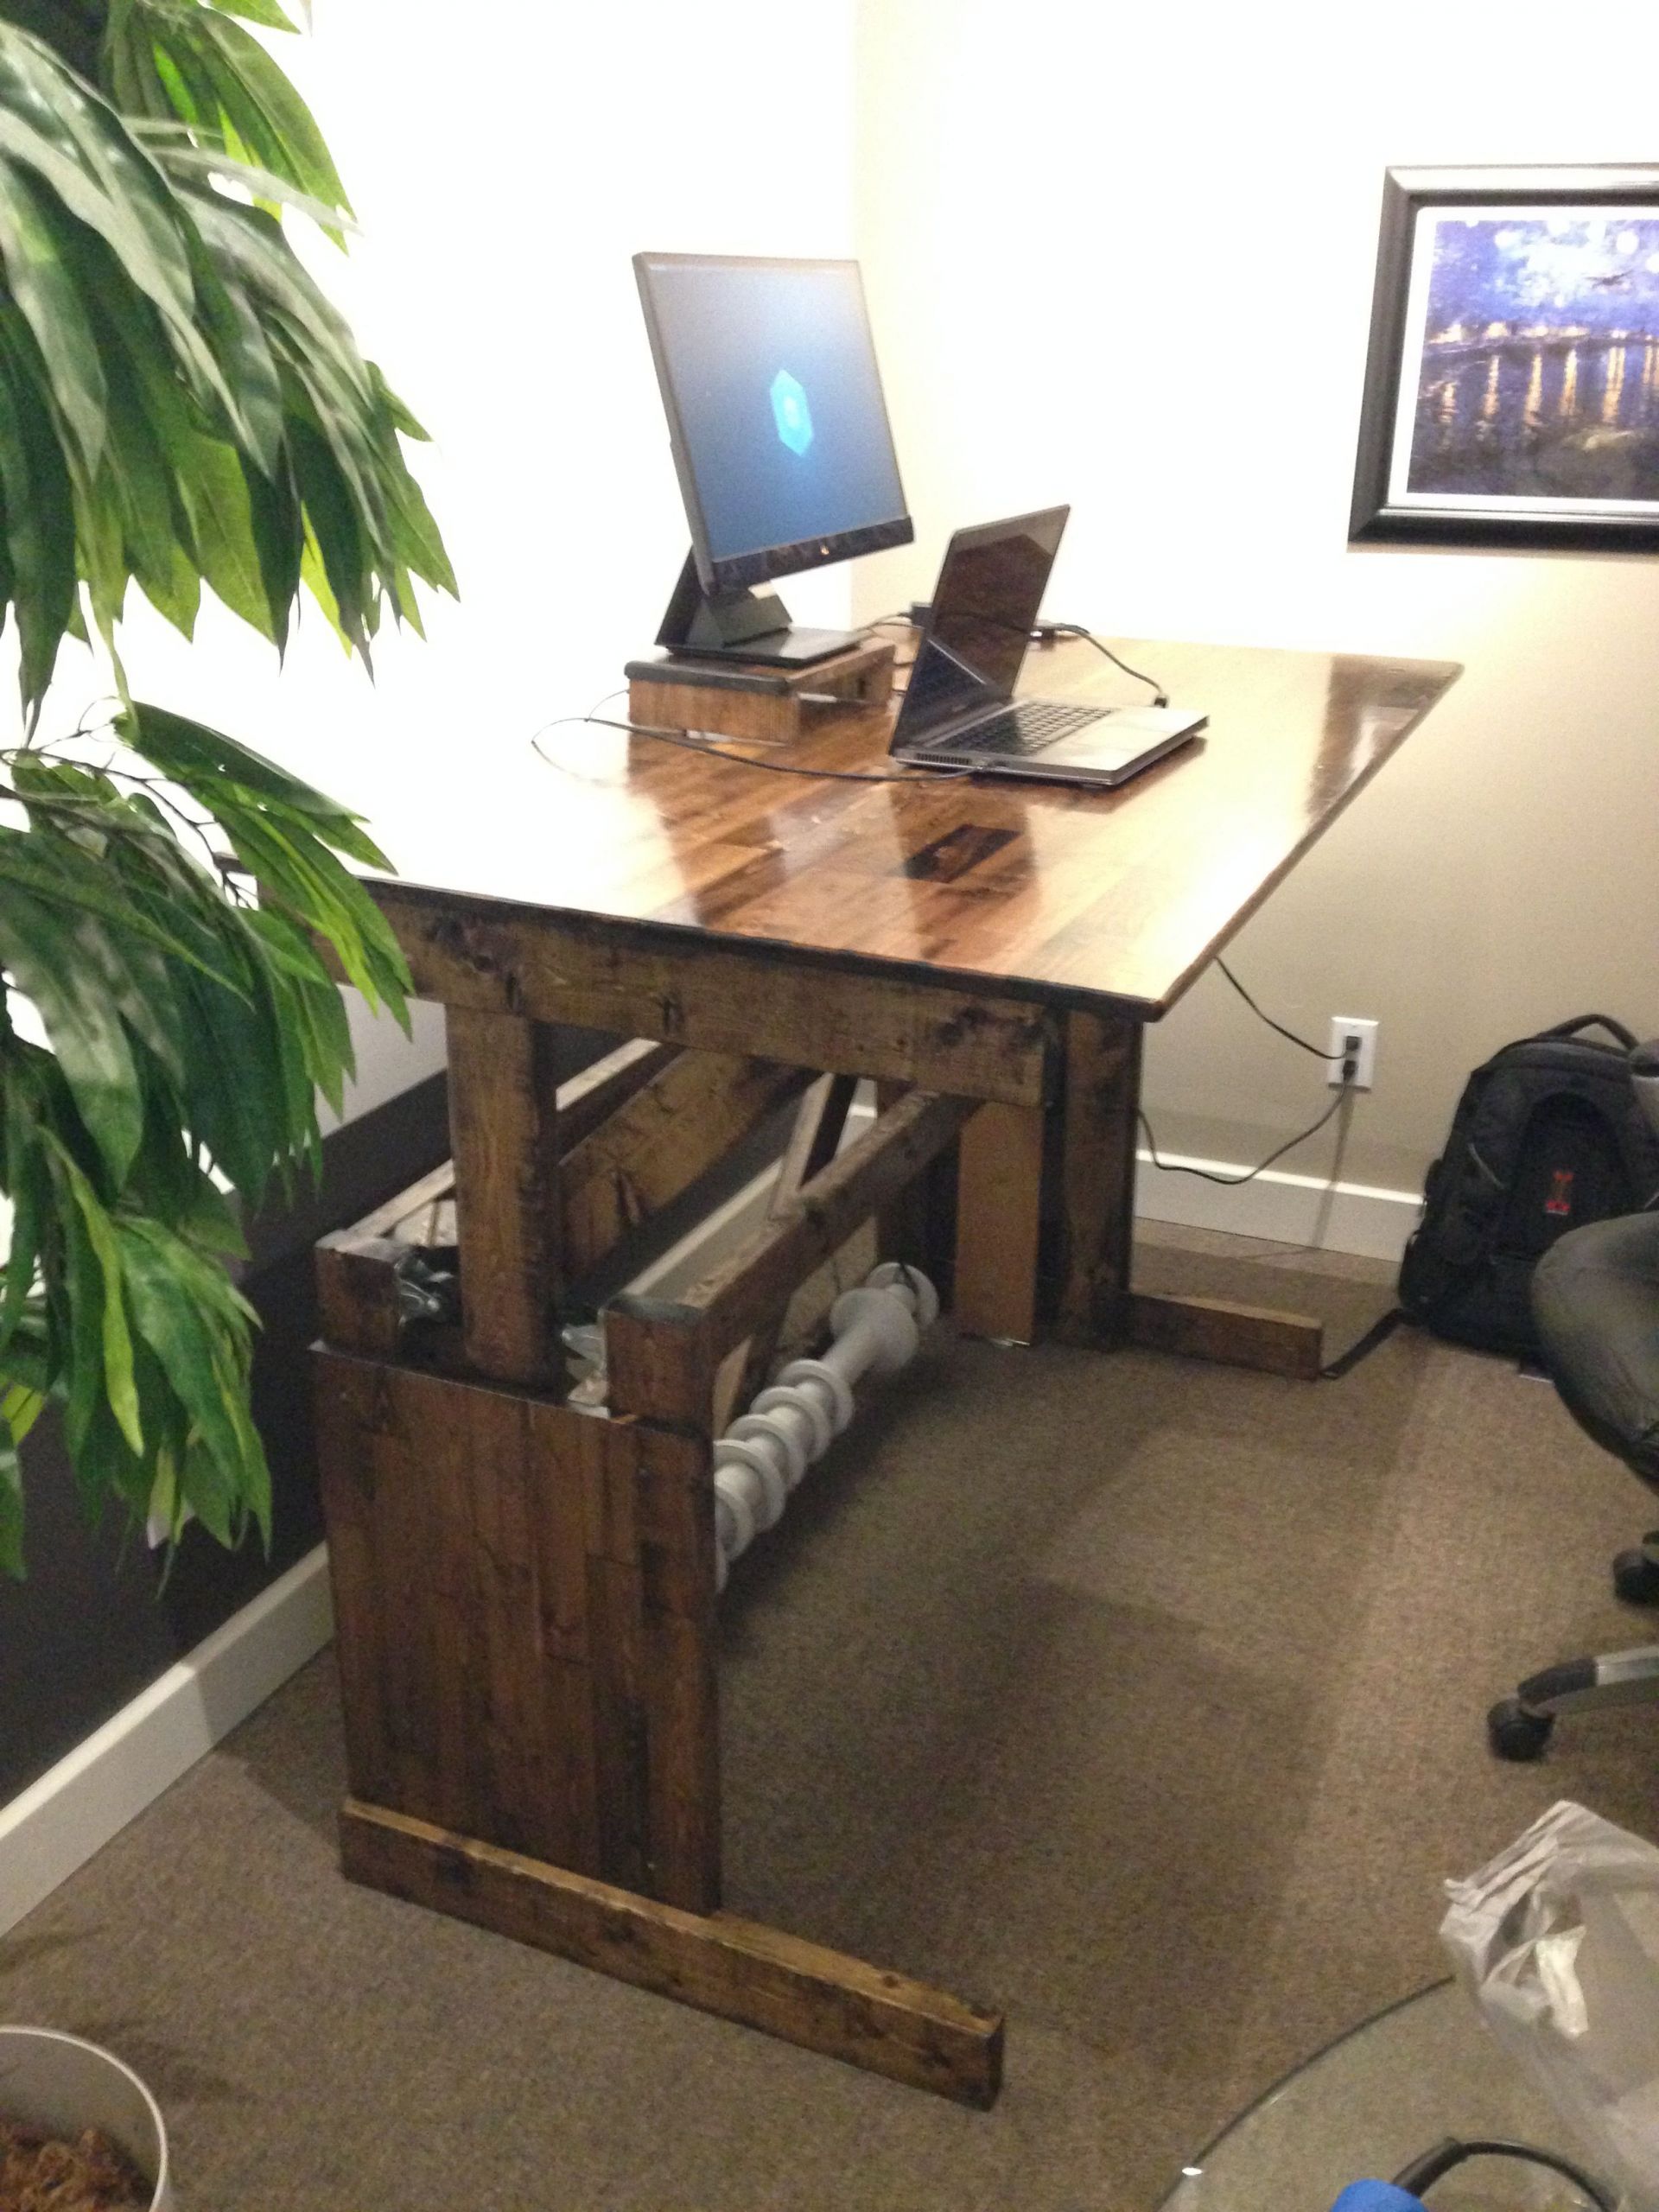 DIY Sit Stand Desk Plans
 I built my own sit stand desk plete with counterweight